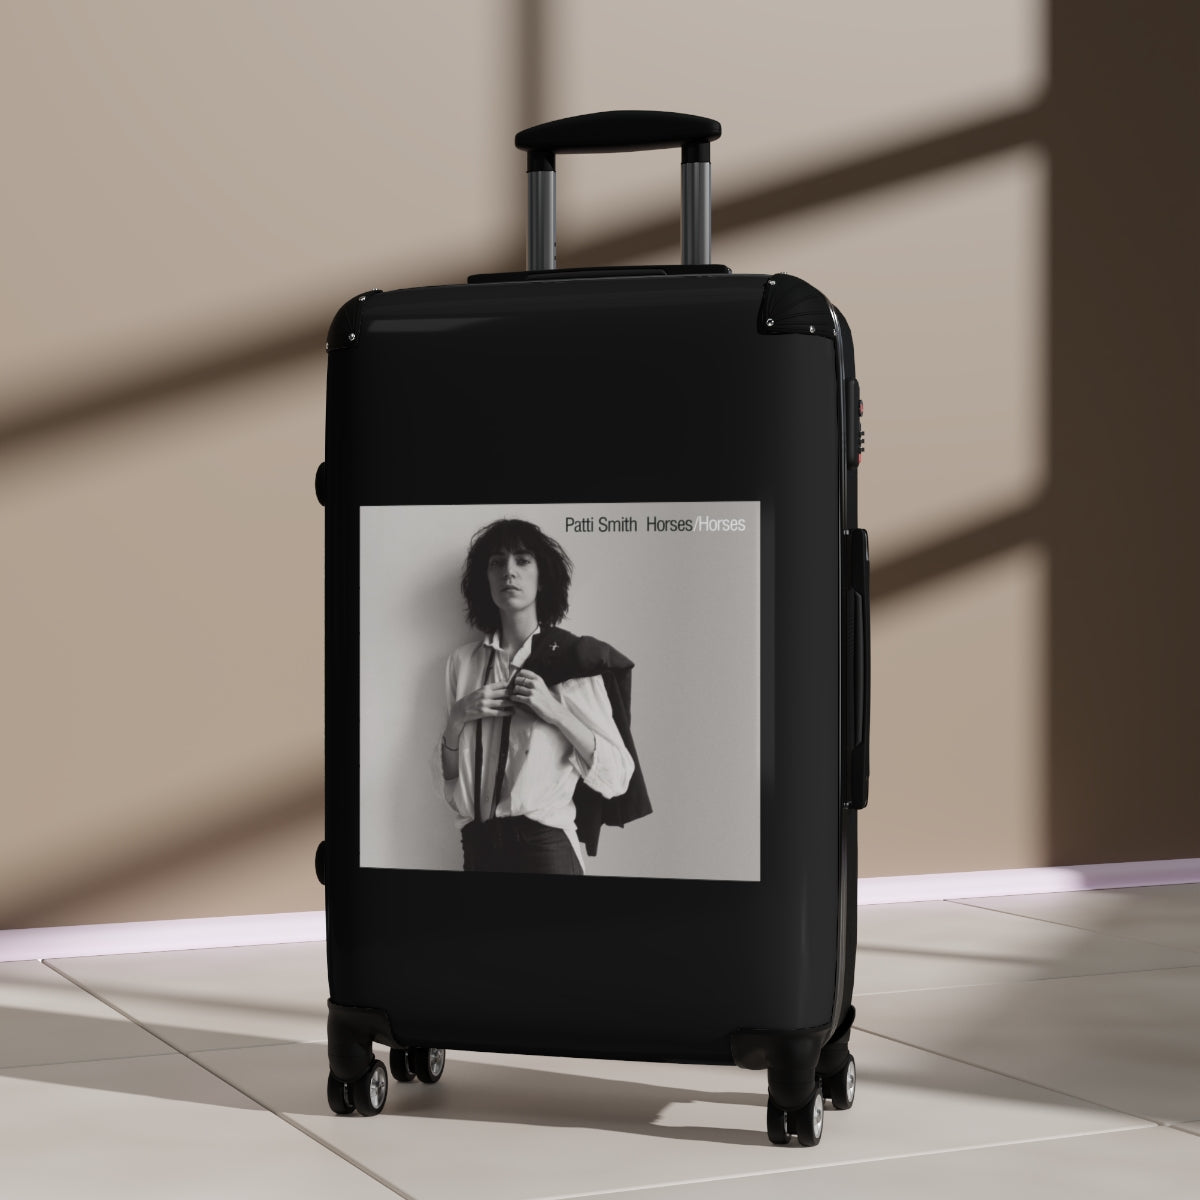 Getrott Patti Smith Horses 1975 Black Cabin Suitcase Inner Pockets Extended Storage Adjustable Telescopic Handle Inner Pockets Double wheeled Polycarbonate Hard-shell Built-in Lock